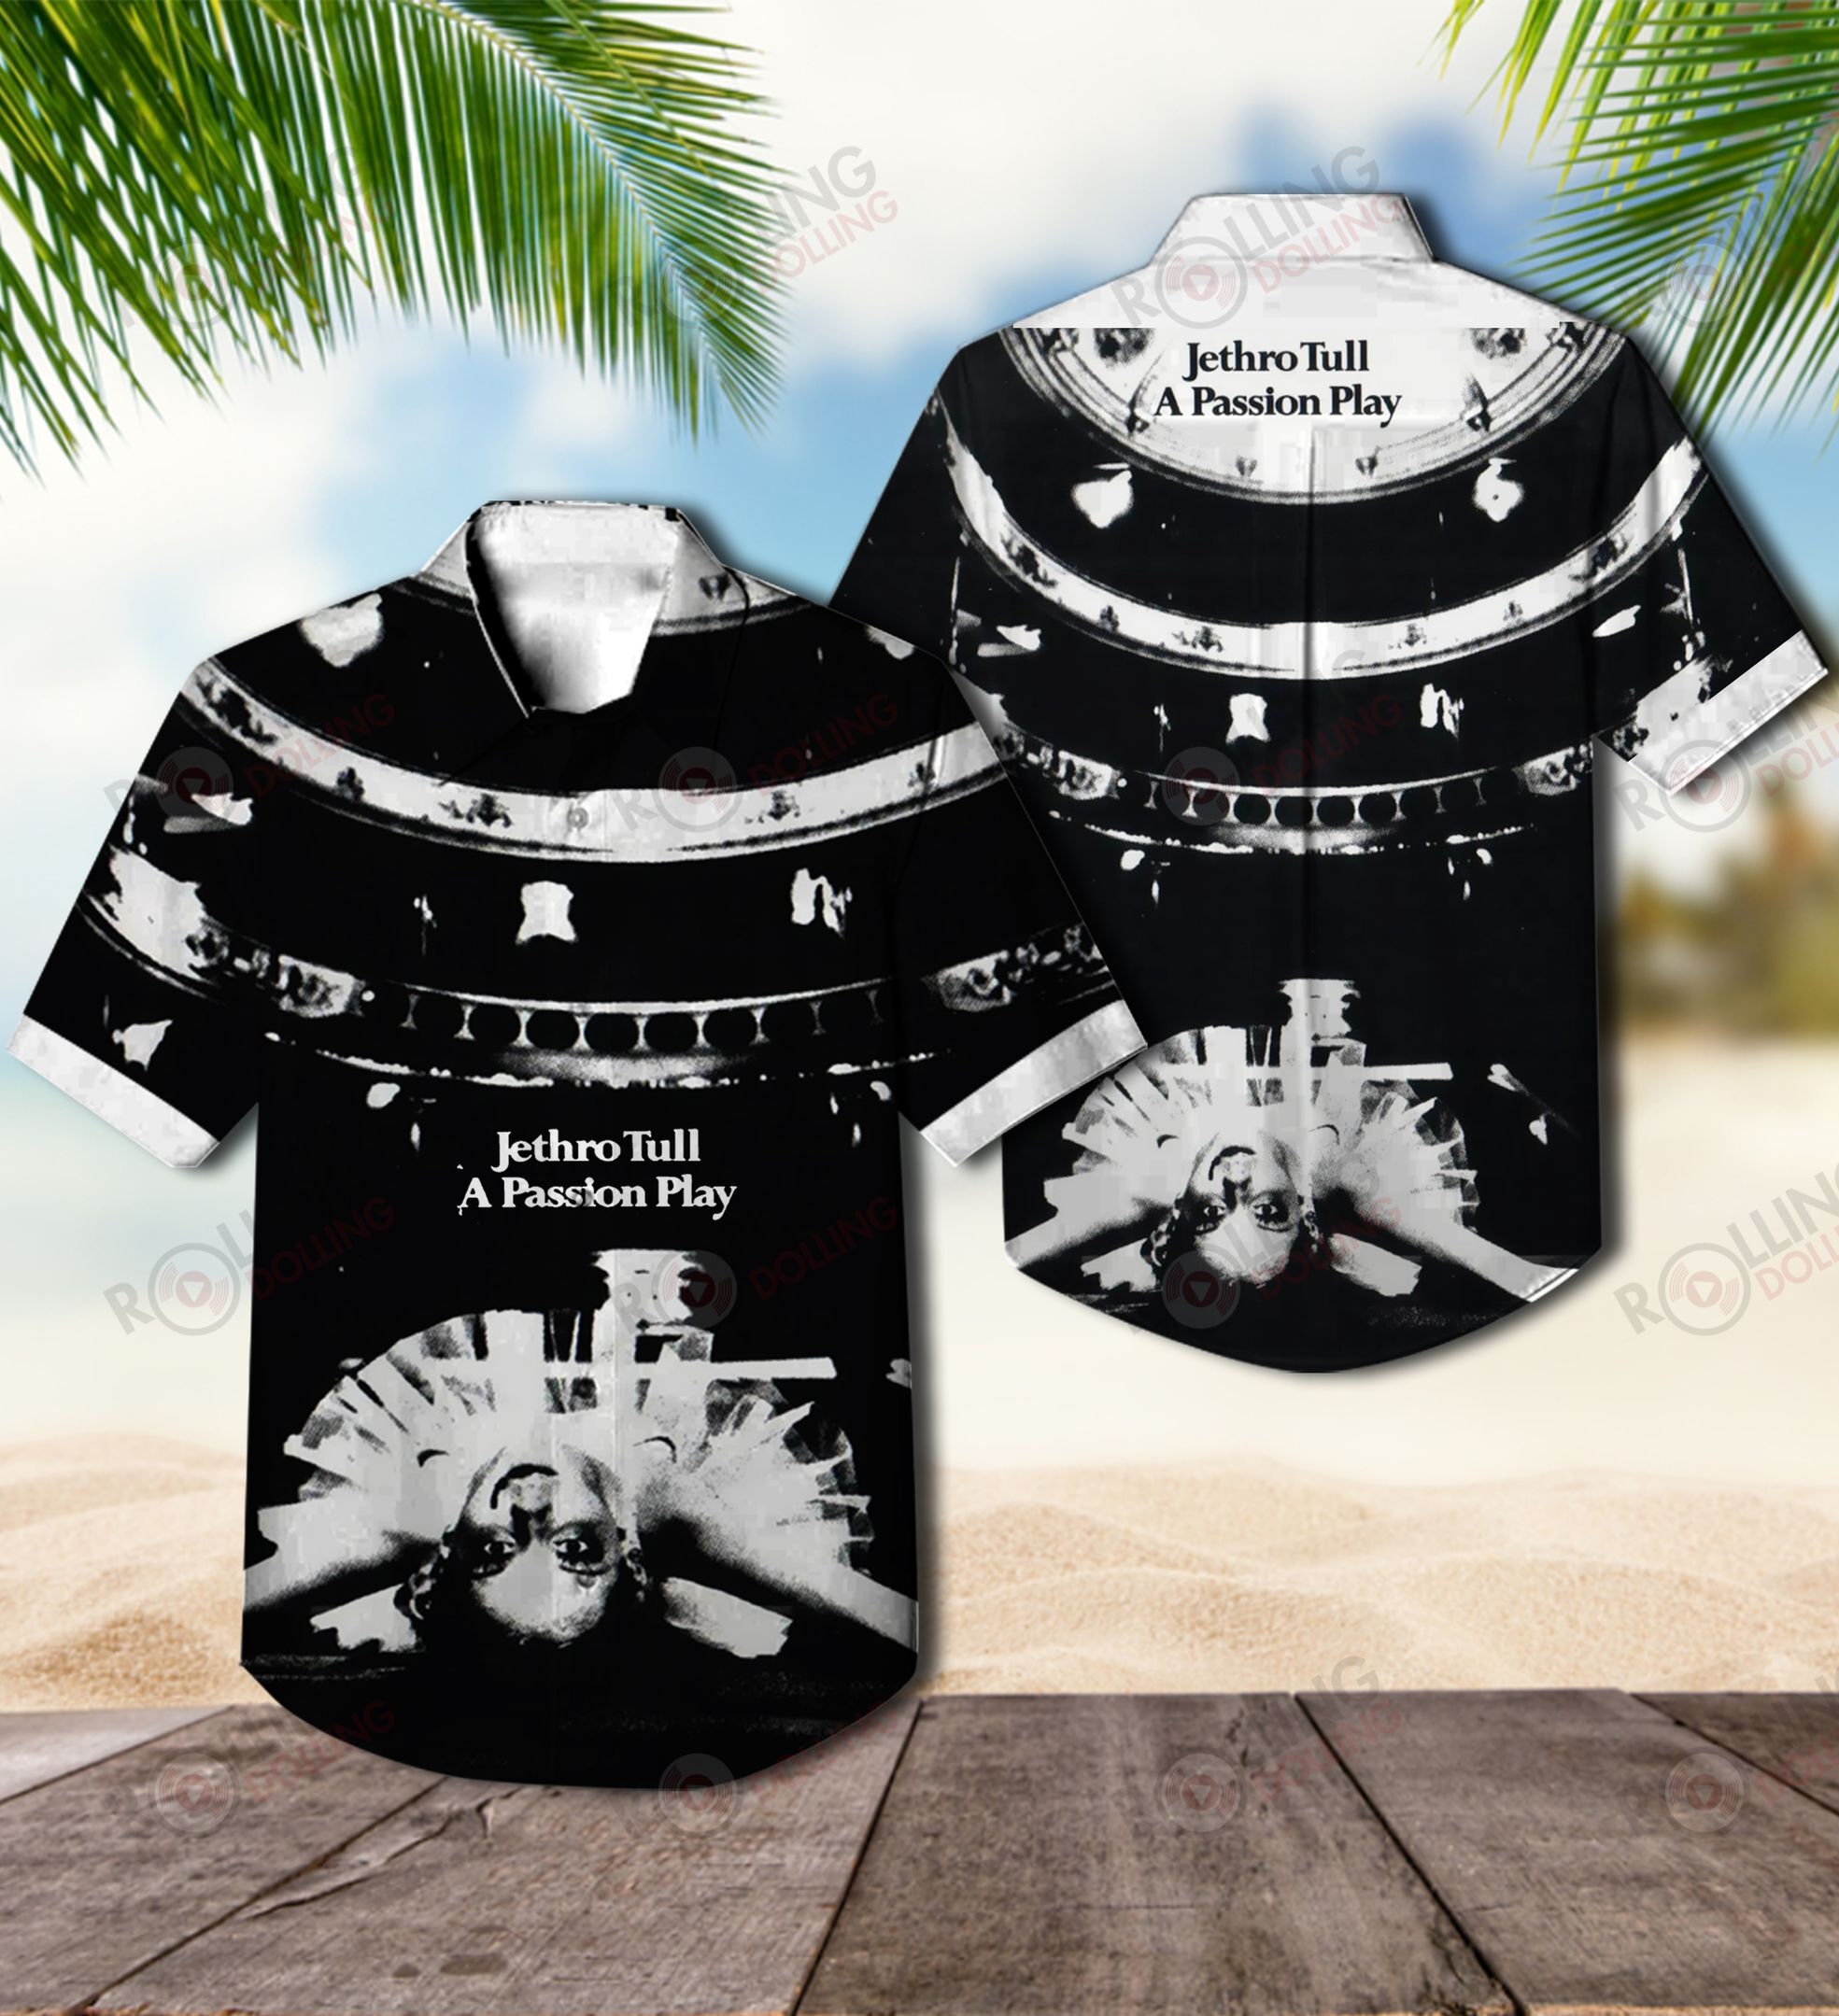 The Hawaiian Shirt is a popular shirt that is worn by Rock band fans 85